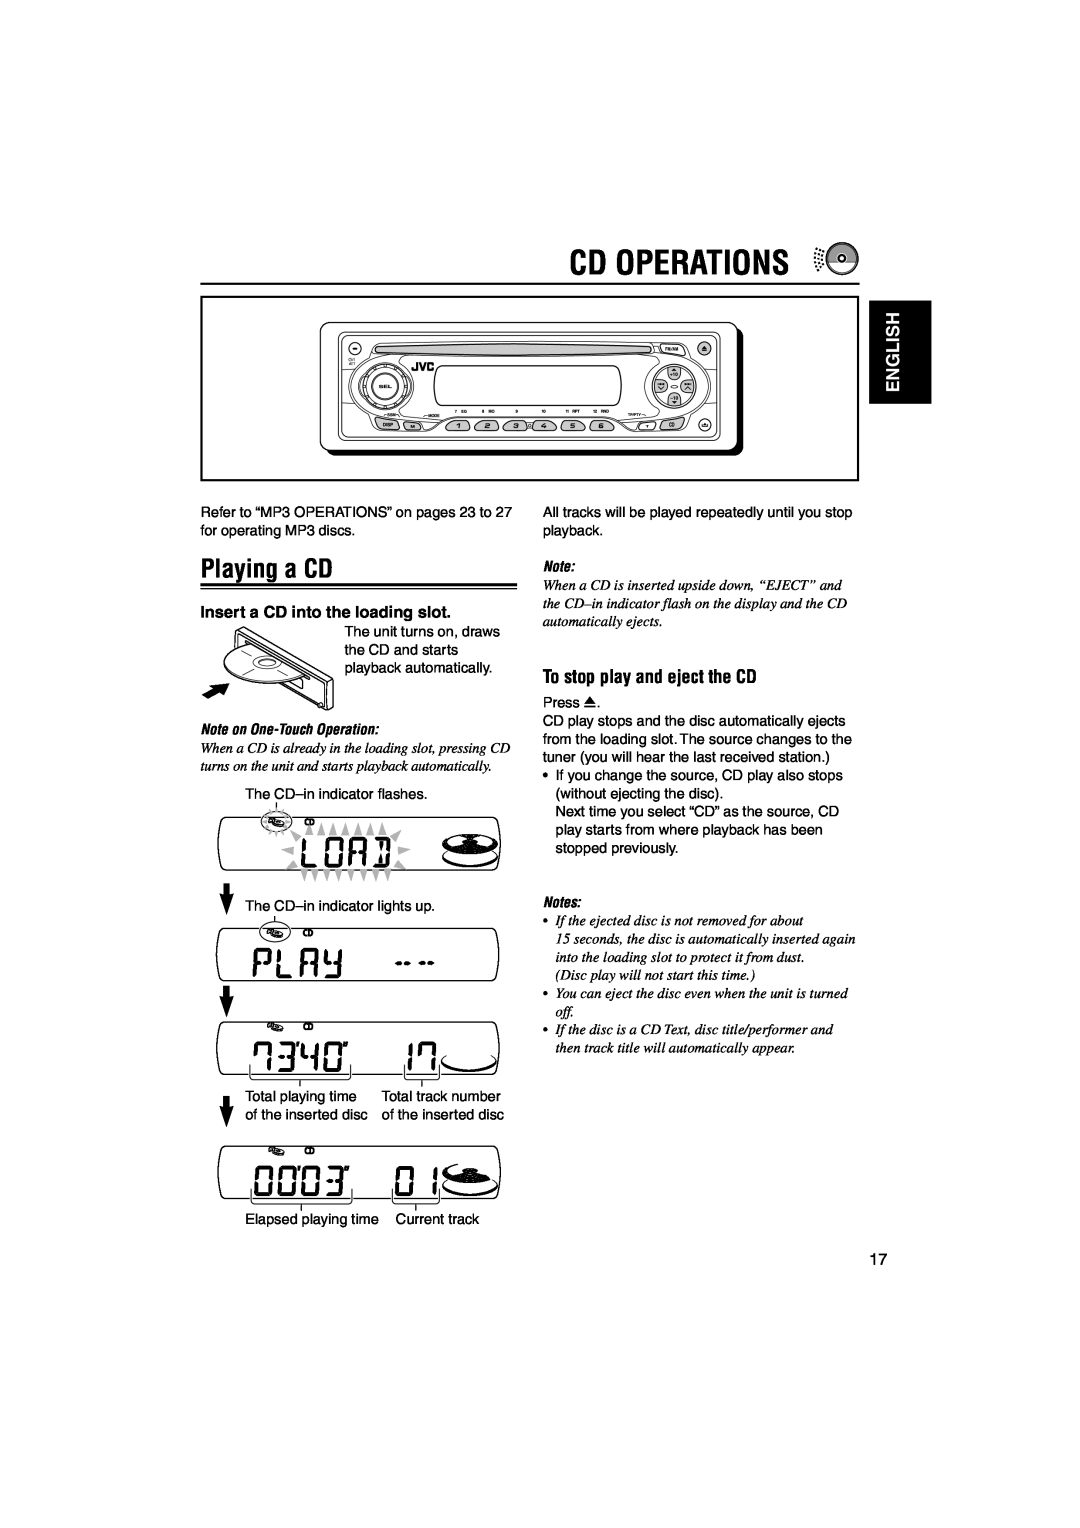 JVC KD-S891R manual Cd Operations, Playing a CD, To stop play and eject the CD, English, Insert a CD into the loading slot 